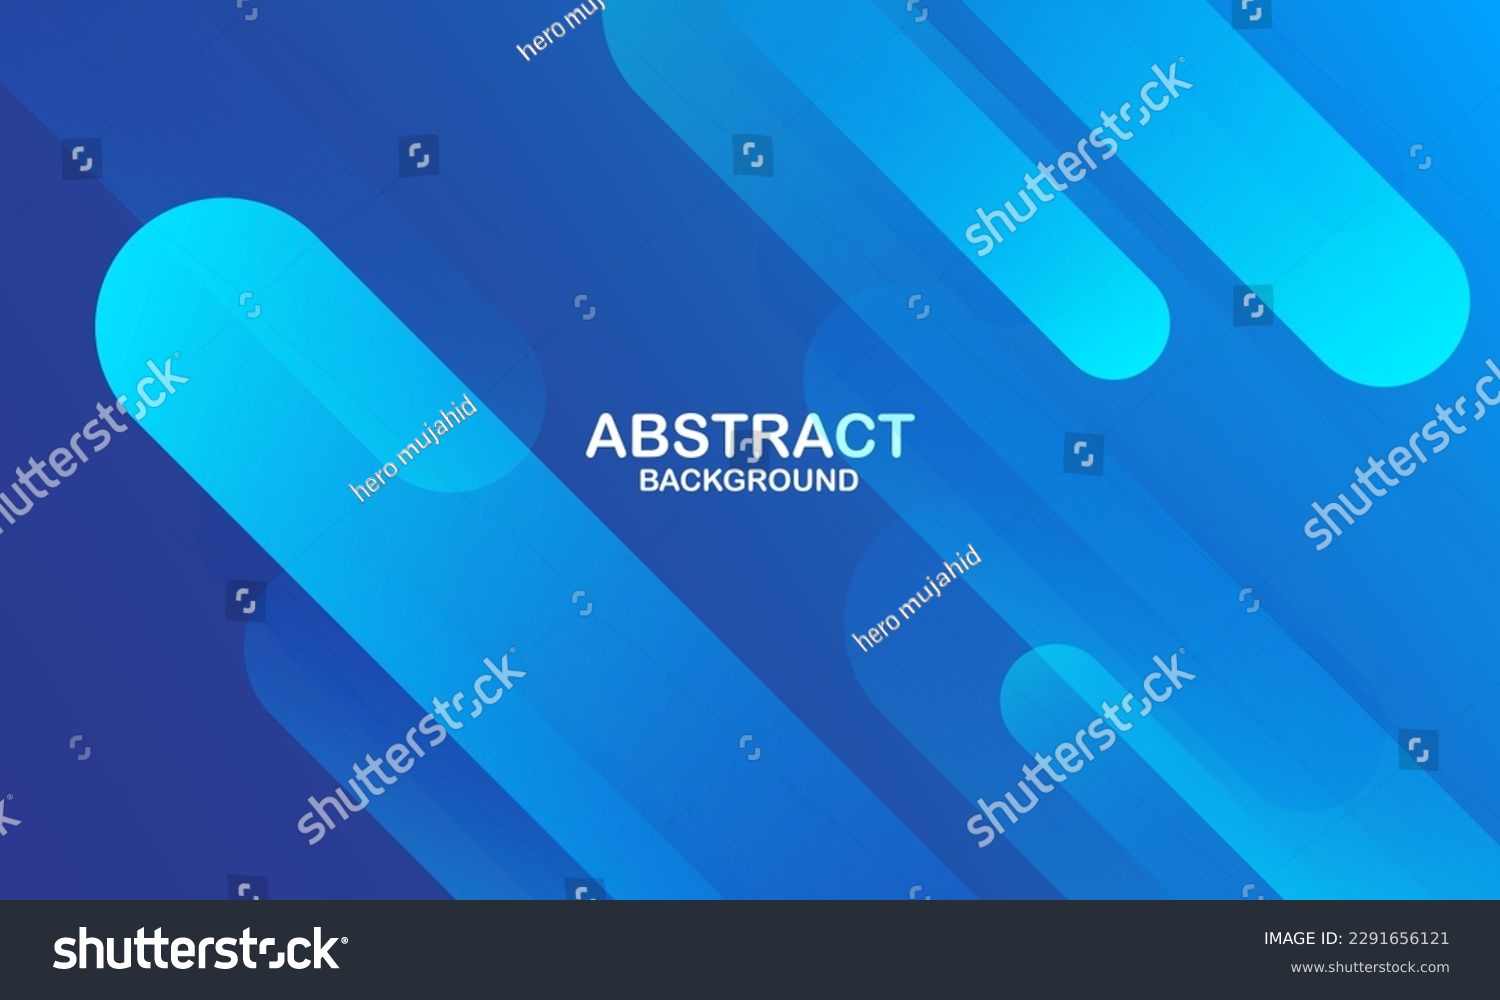 Abstract blue background with diagonal lines. Dynamic shapes composition. Vector illustration #2291656121